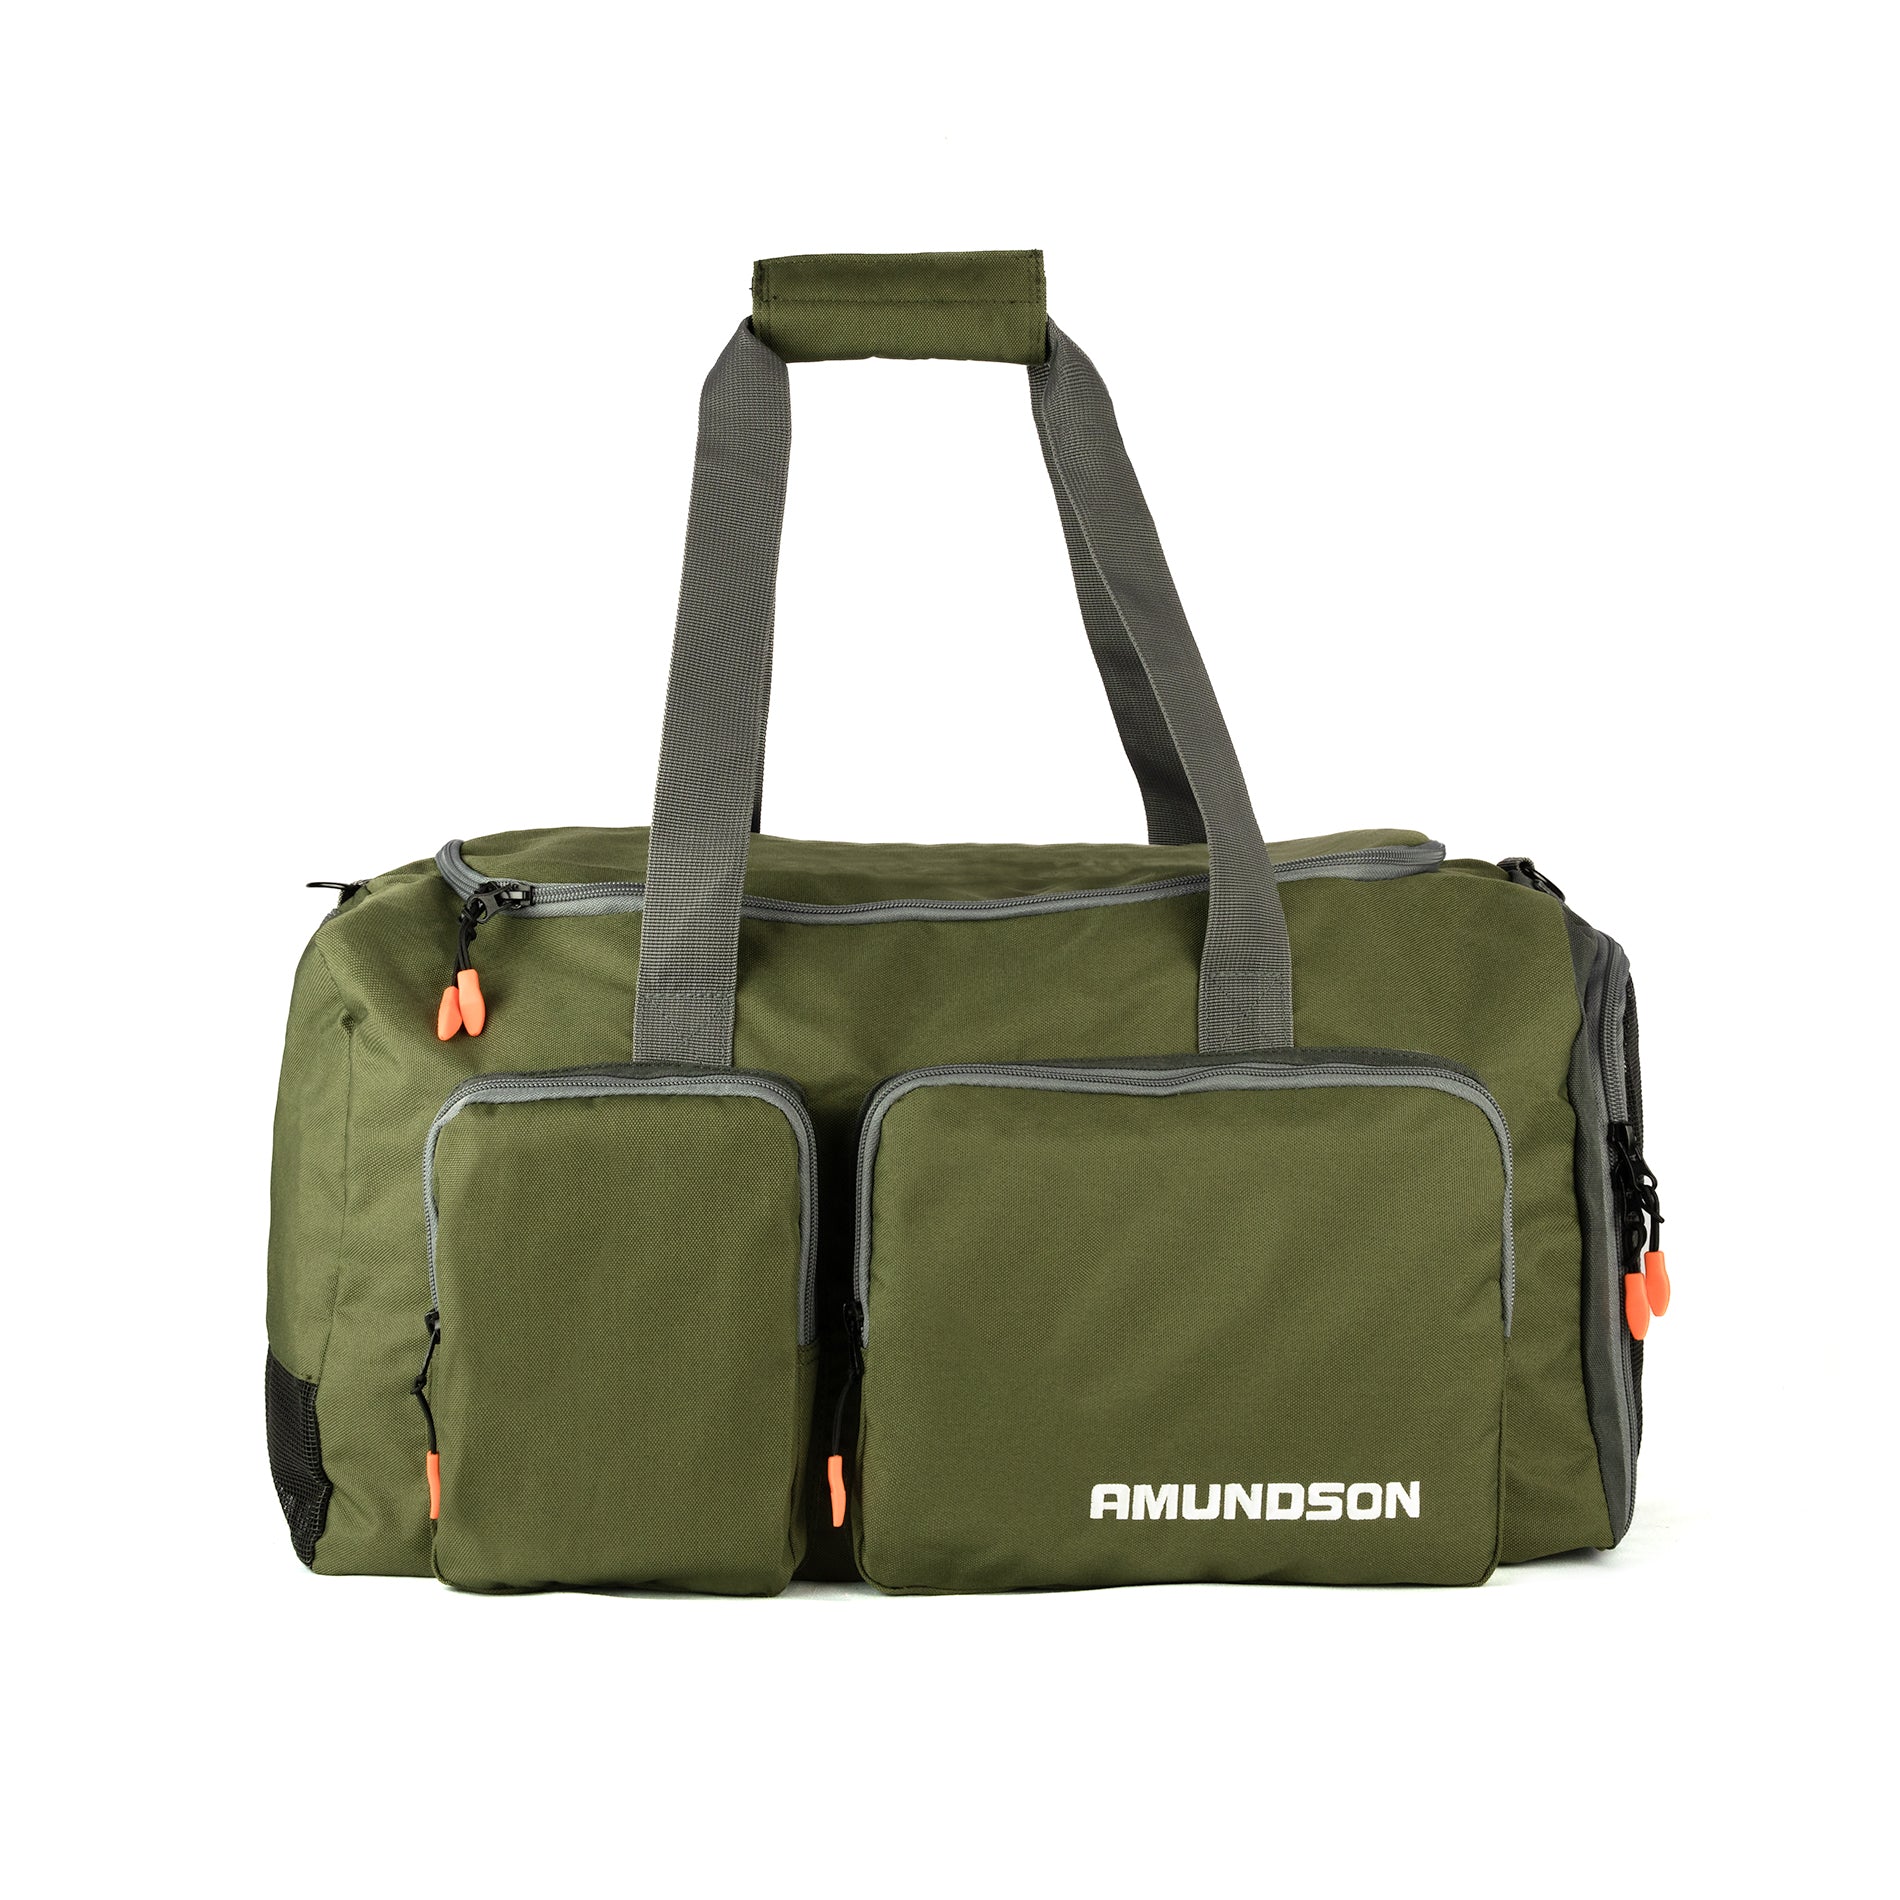 Amundson Wader Bag - 40L in Green from The Fishin' Hole